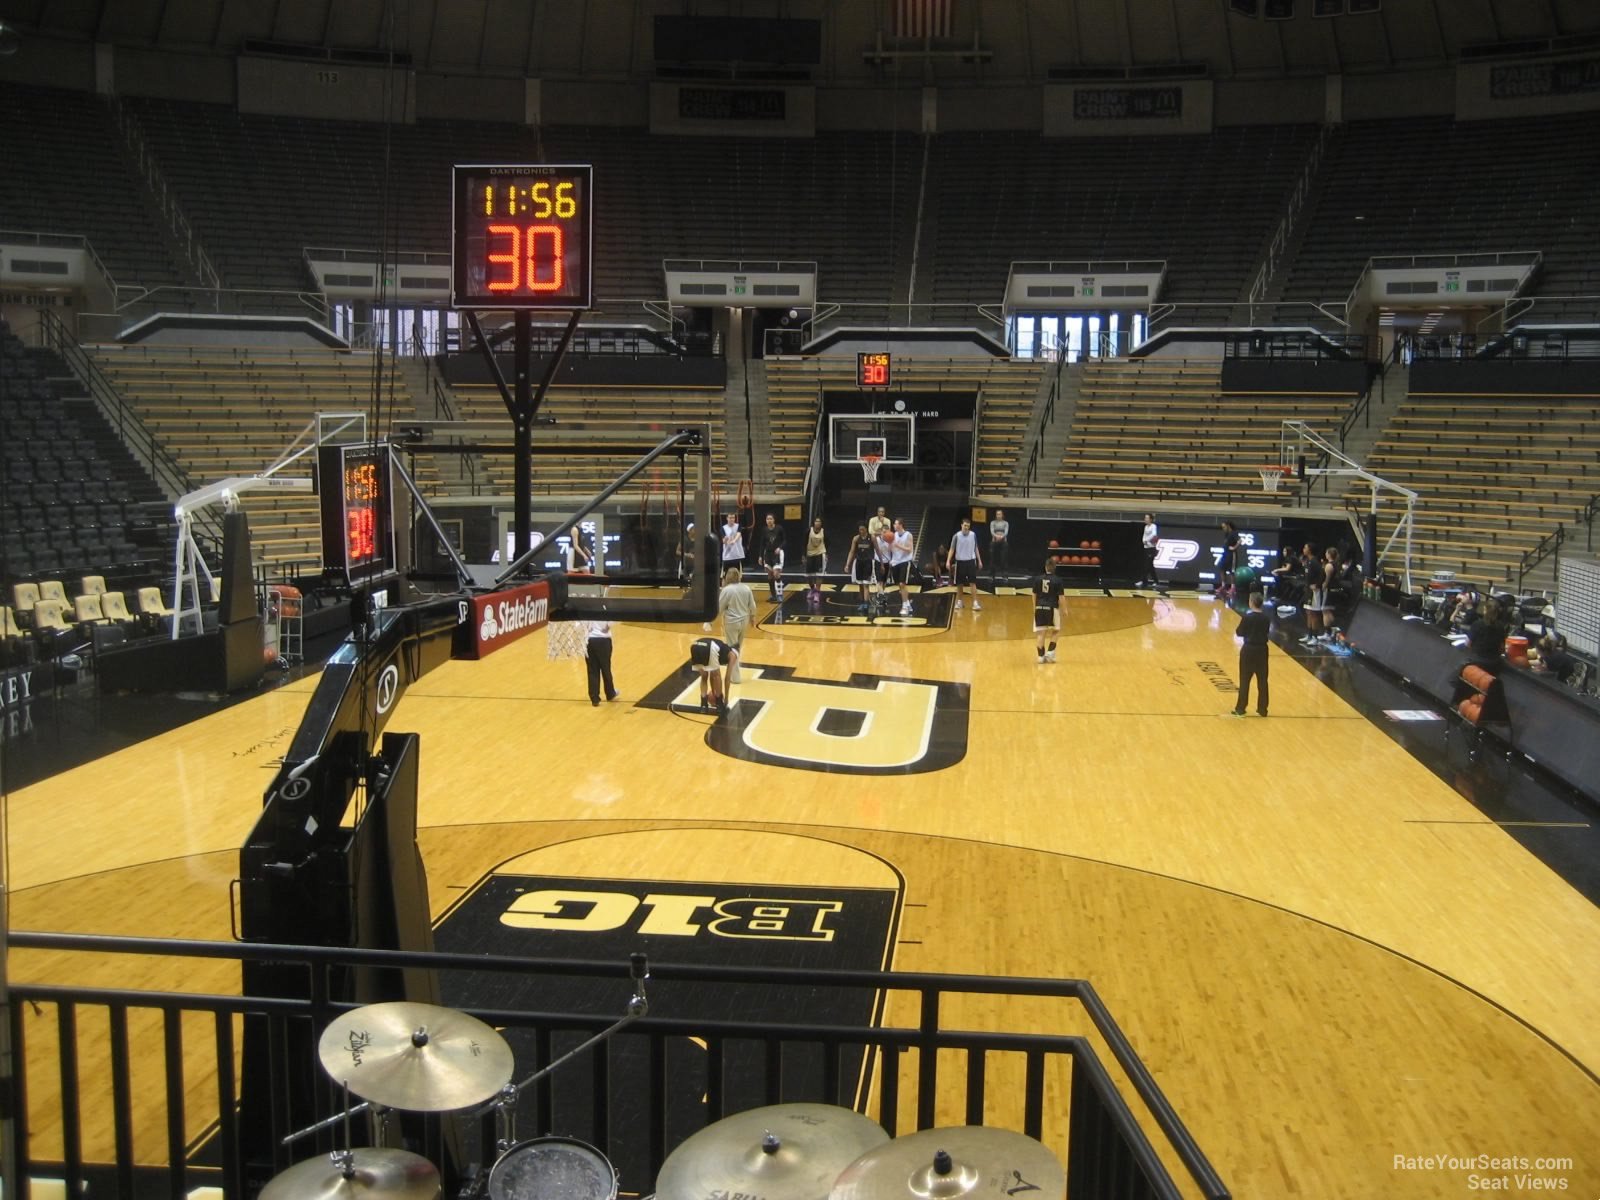 section 5, row 10 seat view  - mackey arena